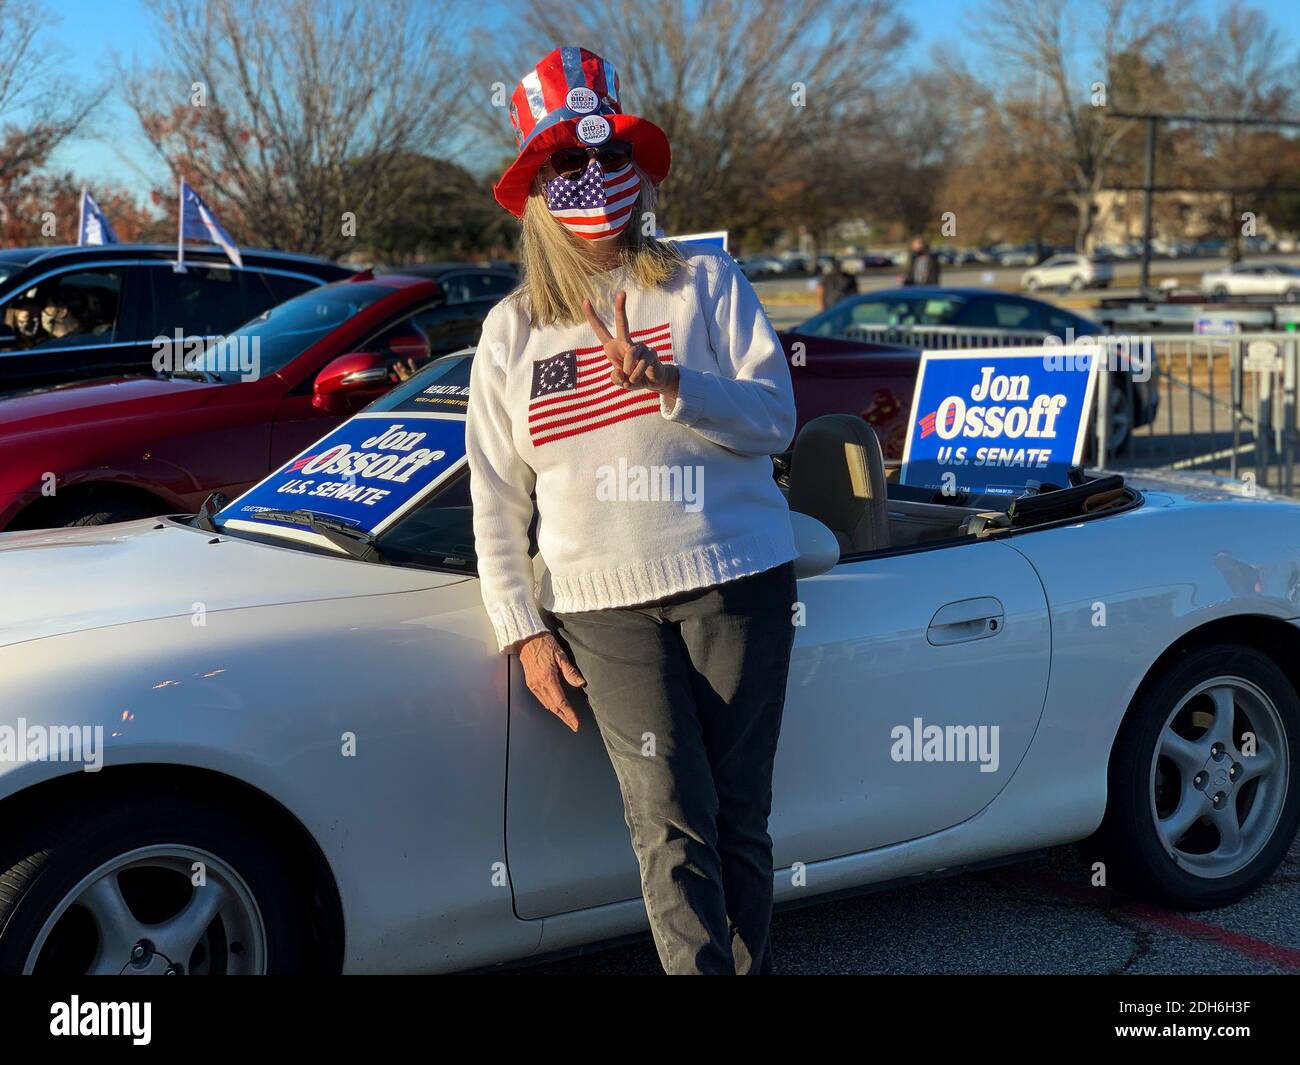 Macon, Georgia, USA. 9th Dec, 2020. Flashing a V for Victory sign, Linda LesterÃs hat and car display her confidence that Democratic Jon Ossoff will win a Senate seat in his upcoming run-off race. Credit: Sue Dorfman/ZUMA Wire/Alamy Live News Stock Photo